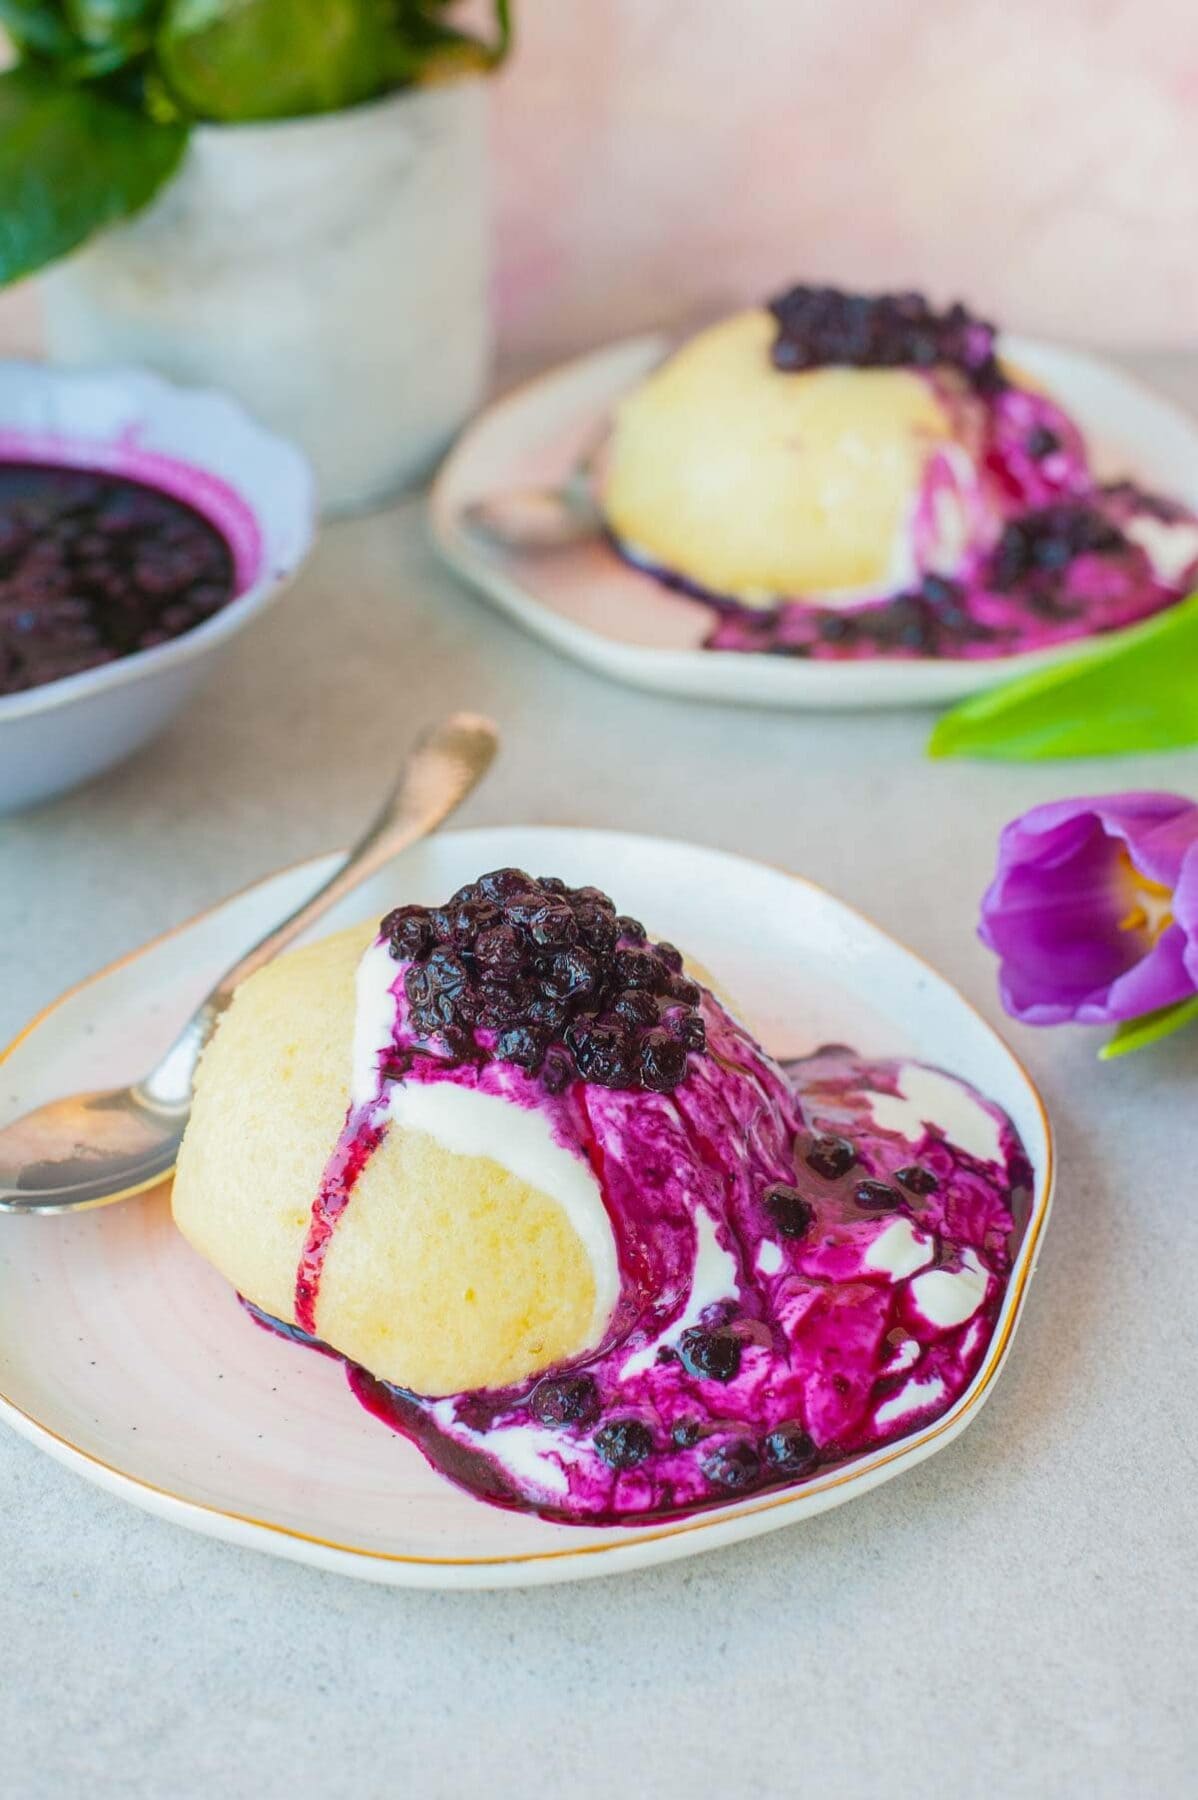 Fluffy sweet steamed buns with blueberry sauce on a rose plate